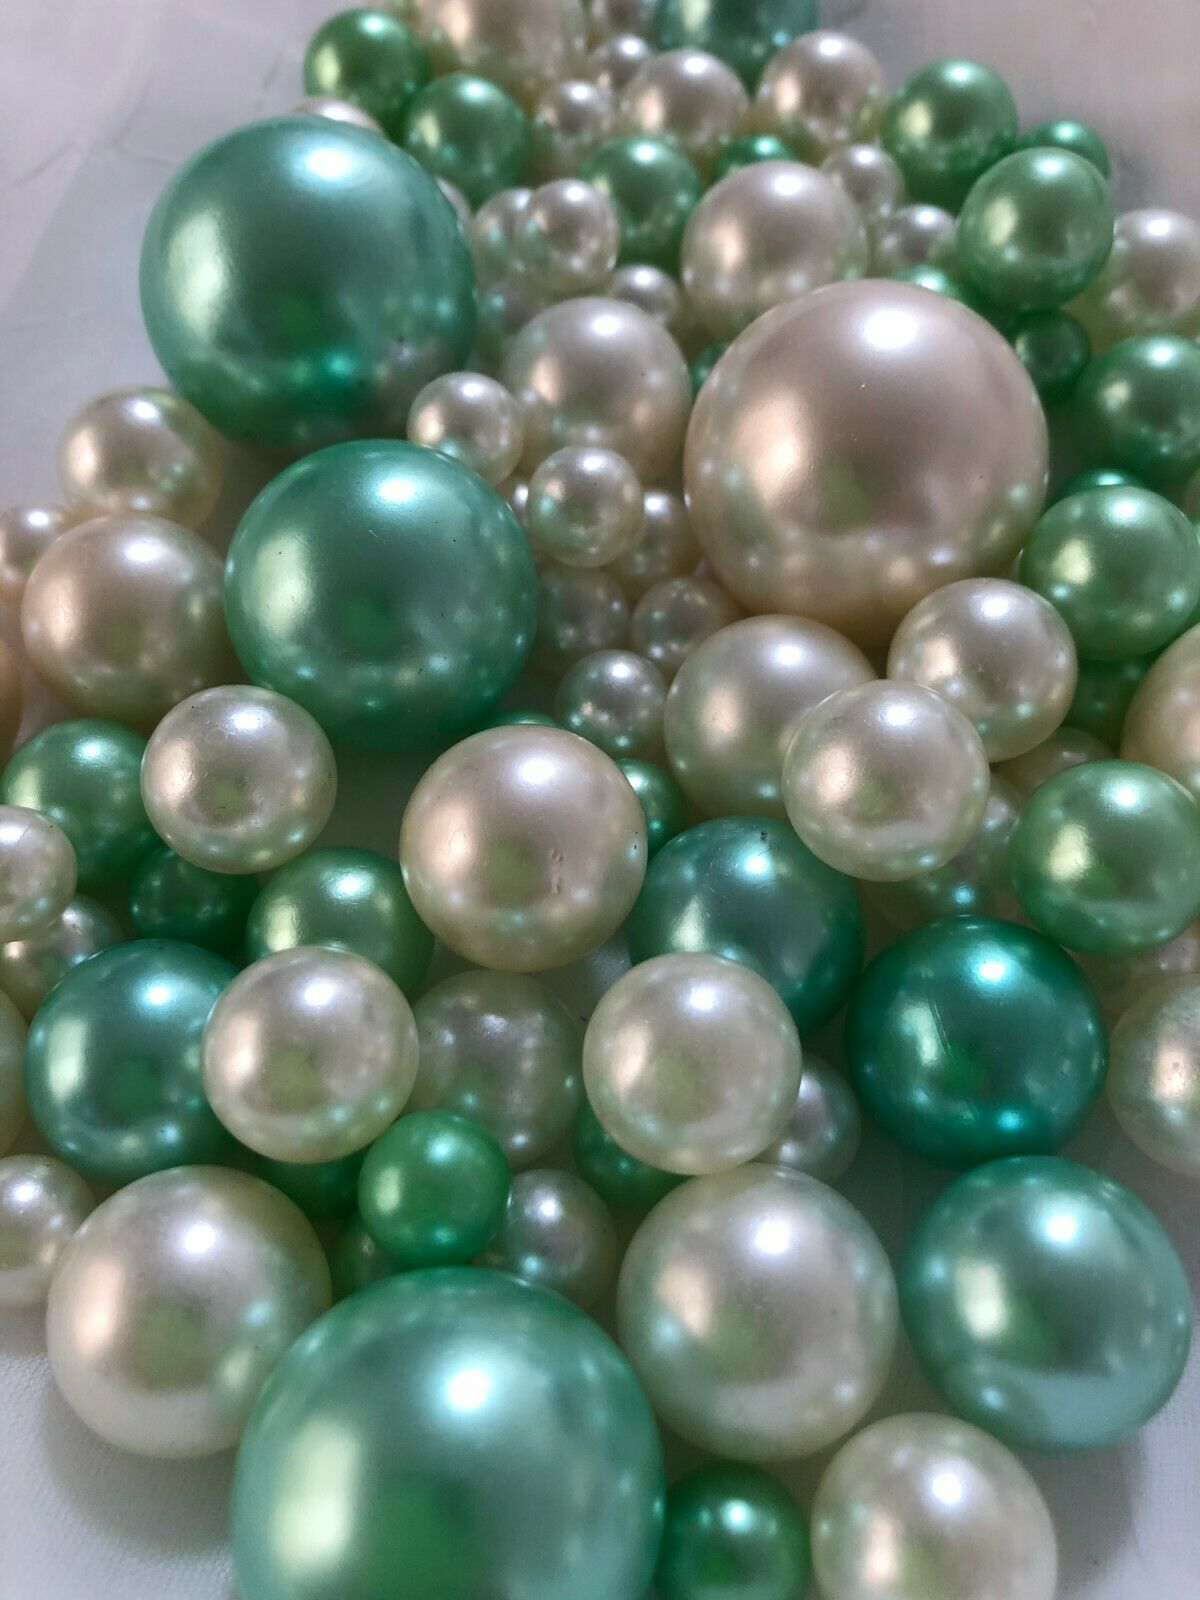 Seafoam Green Ivory Vase Filler Pearls 80pc Floating Pearl Decor, Table Scatter